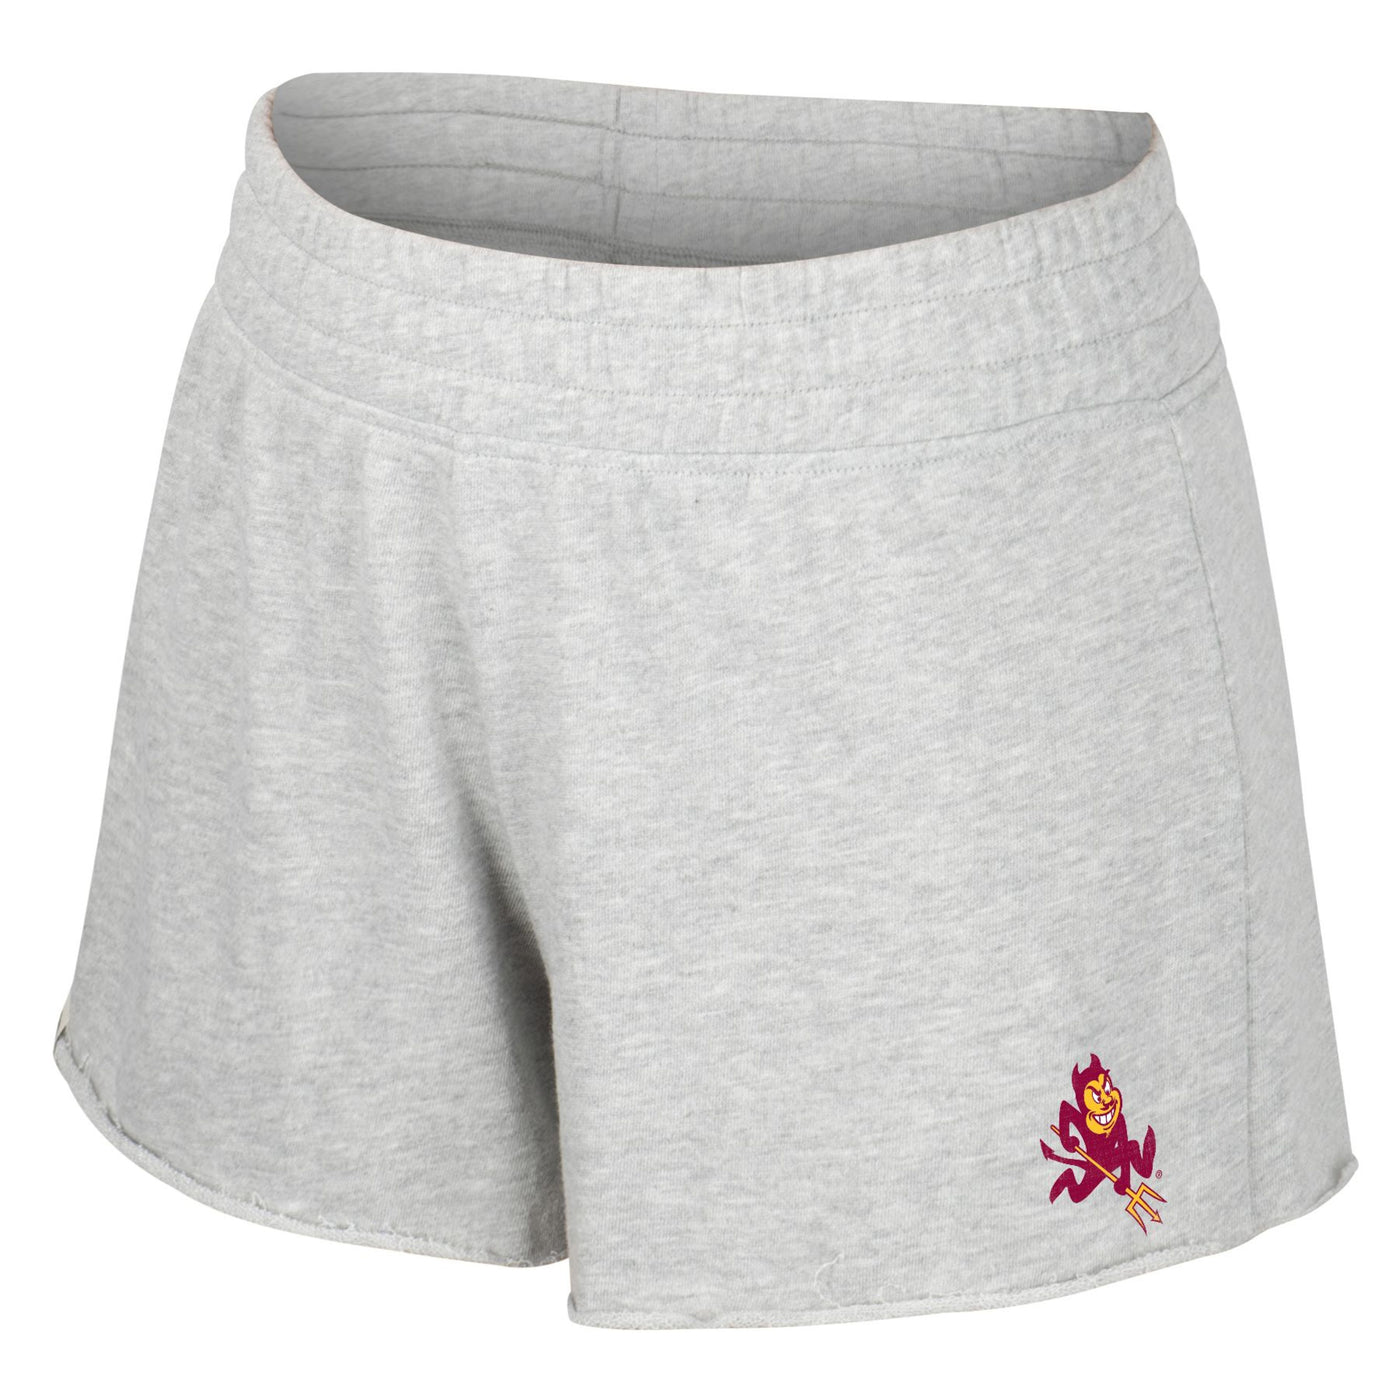 ASU women's grey shorts with small sparky mascot on bottom corner